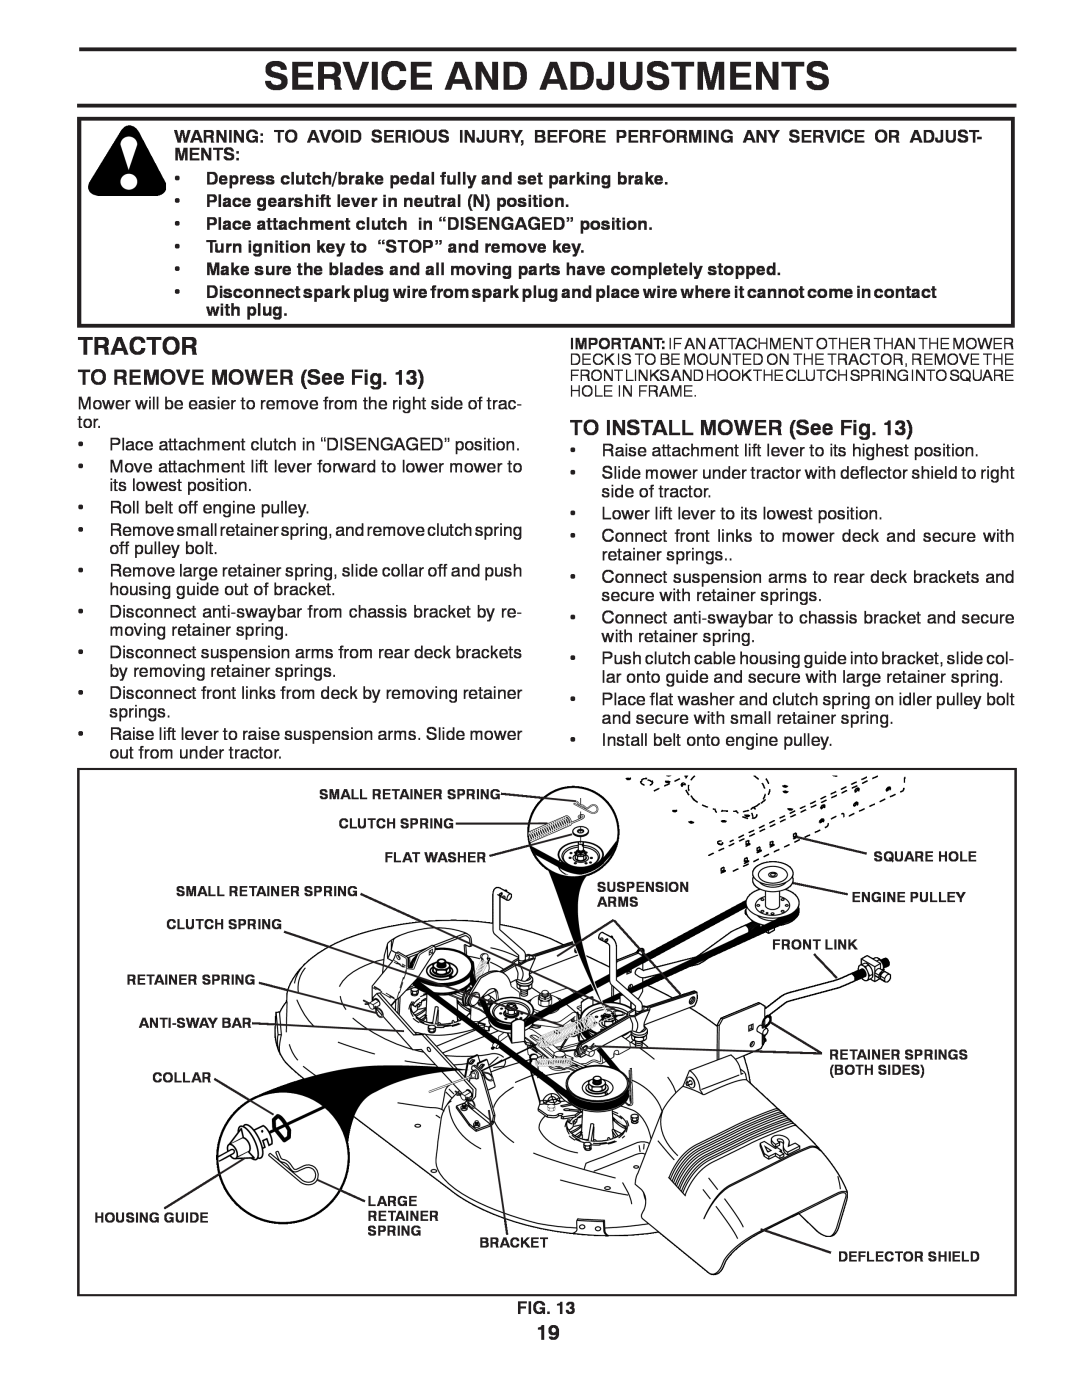 Poulan 425179 manual Service And Adjustments, TO REMOVE MOWER See Fig, TO INSTALL MOWER See Fig, Tractor 